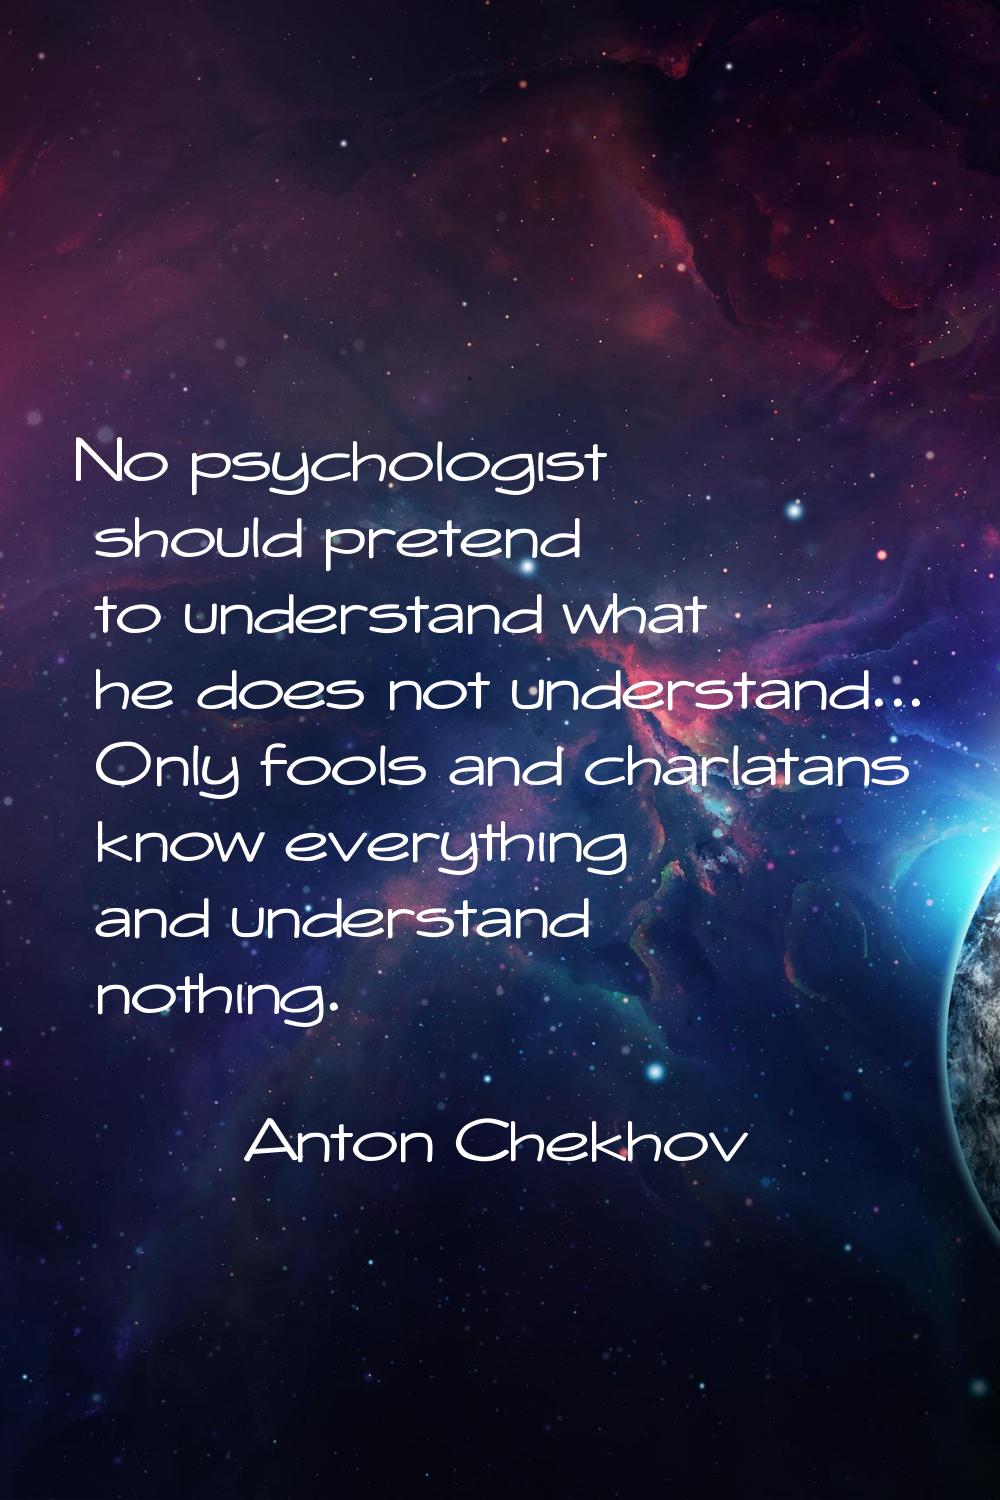 No psychologist should pretend to understand what he does not understand... Only fools and charlata